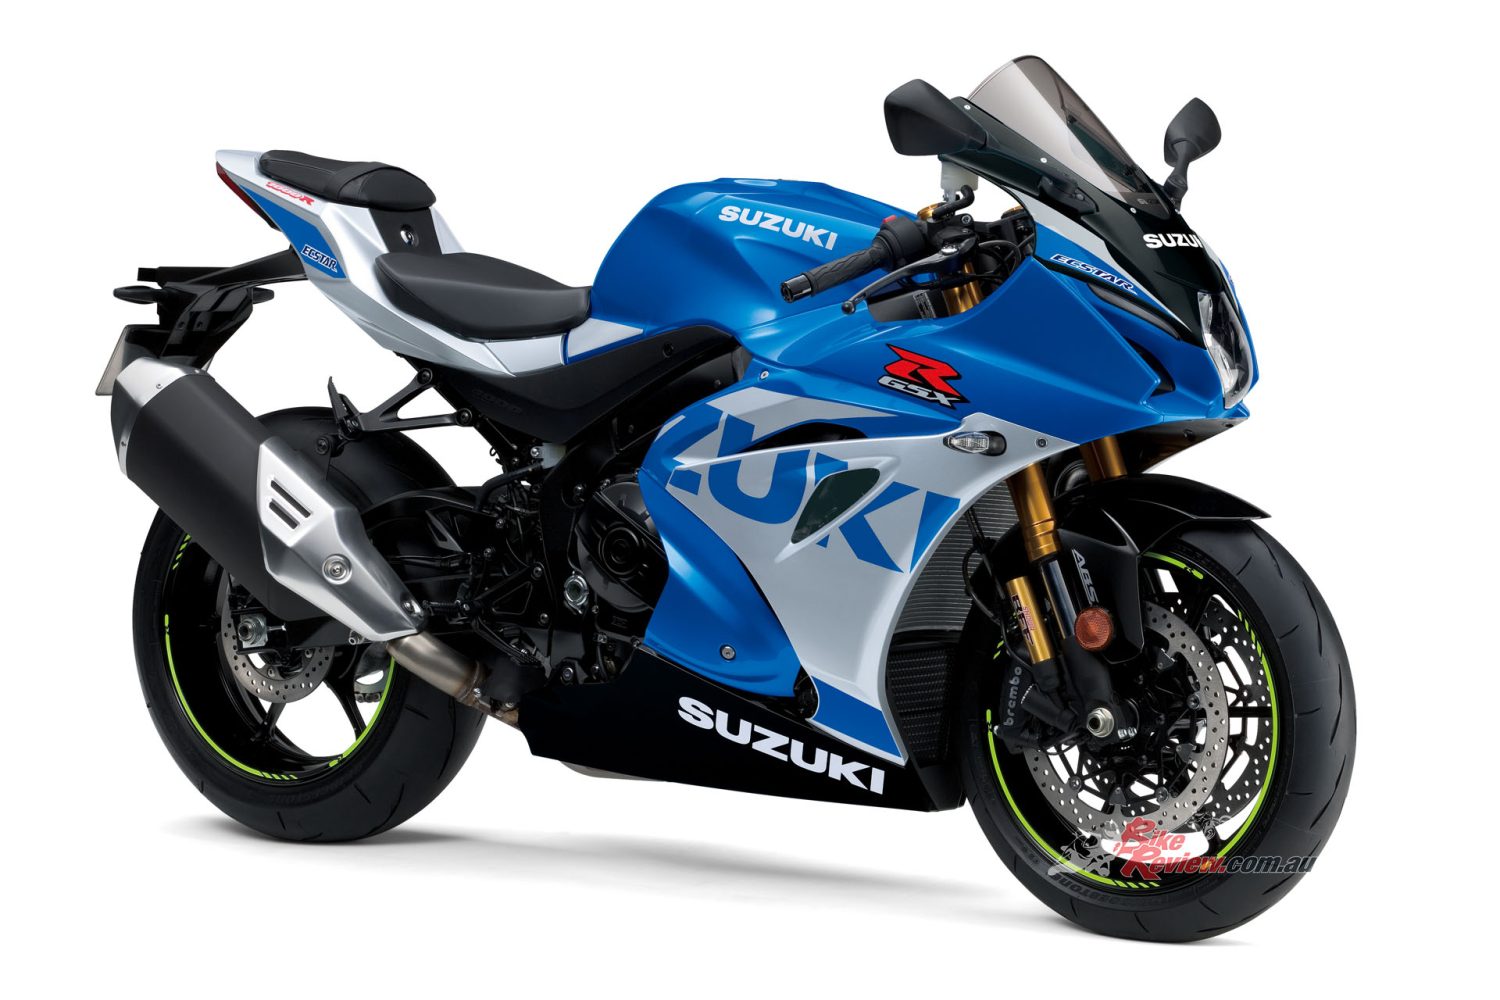 In 2023, the Suzuki Racing pedigree will continue with the double-tiered one-litre range comprising of the GSX-R1000 and flagship GSX-R1000R.